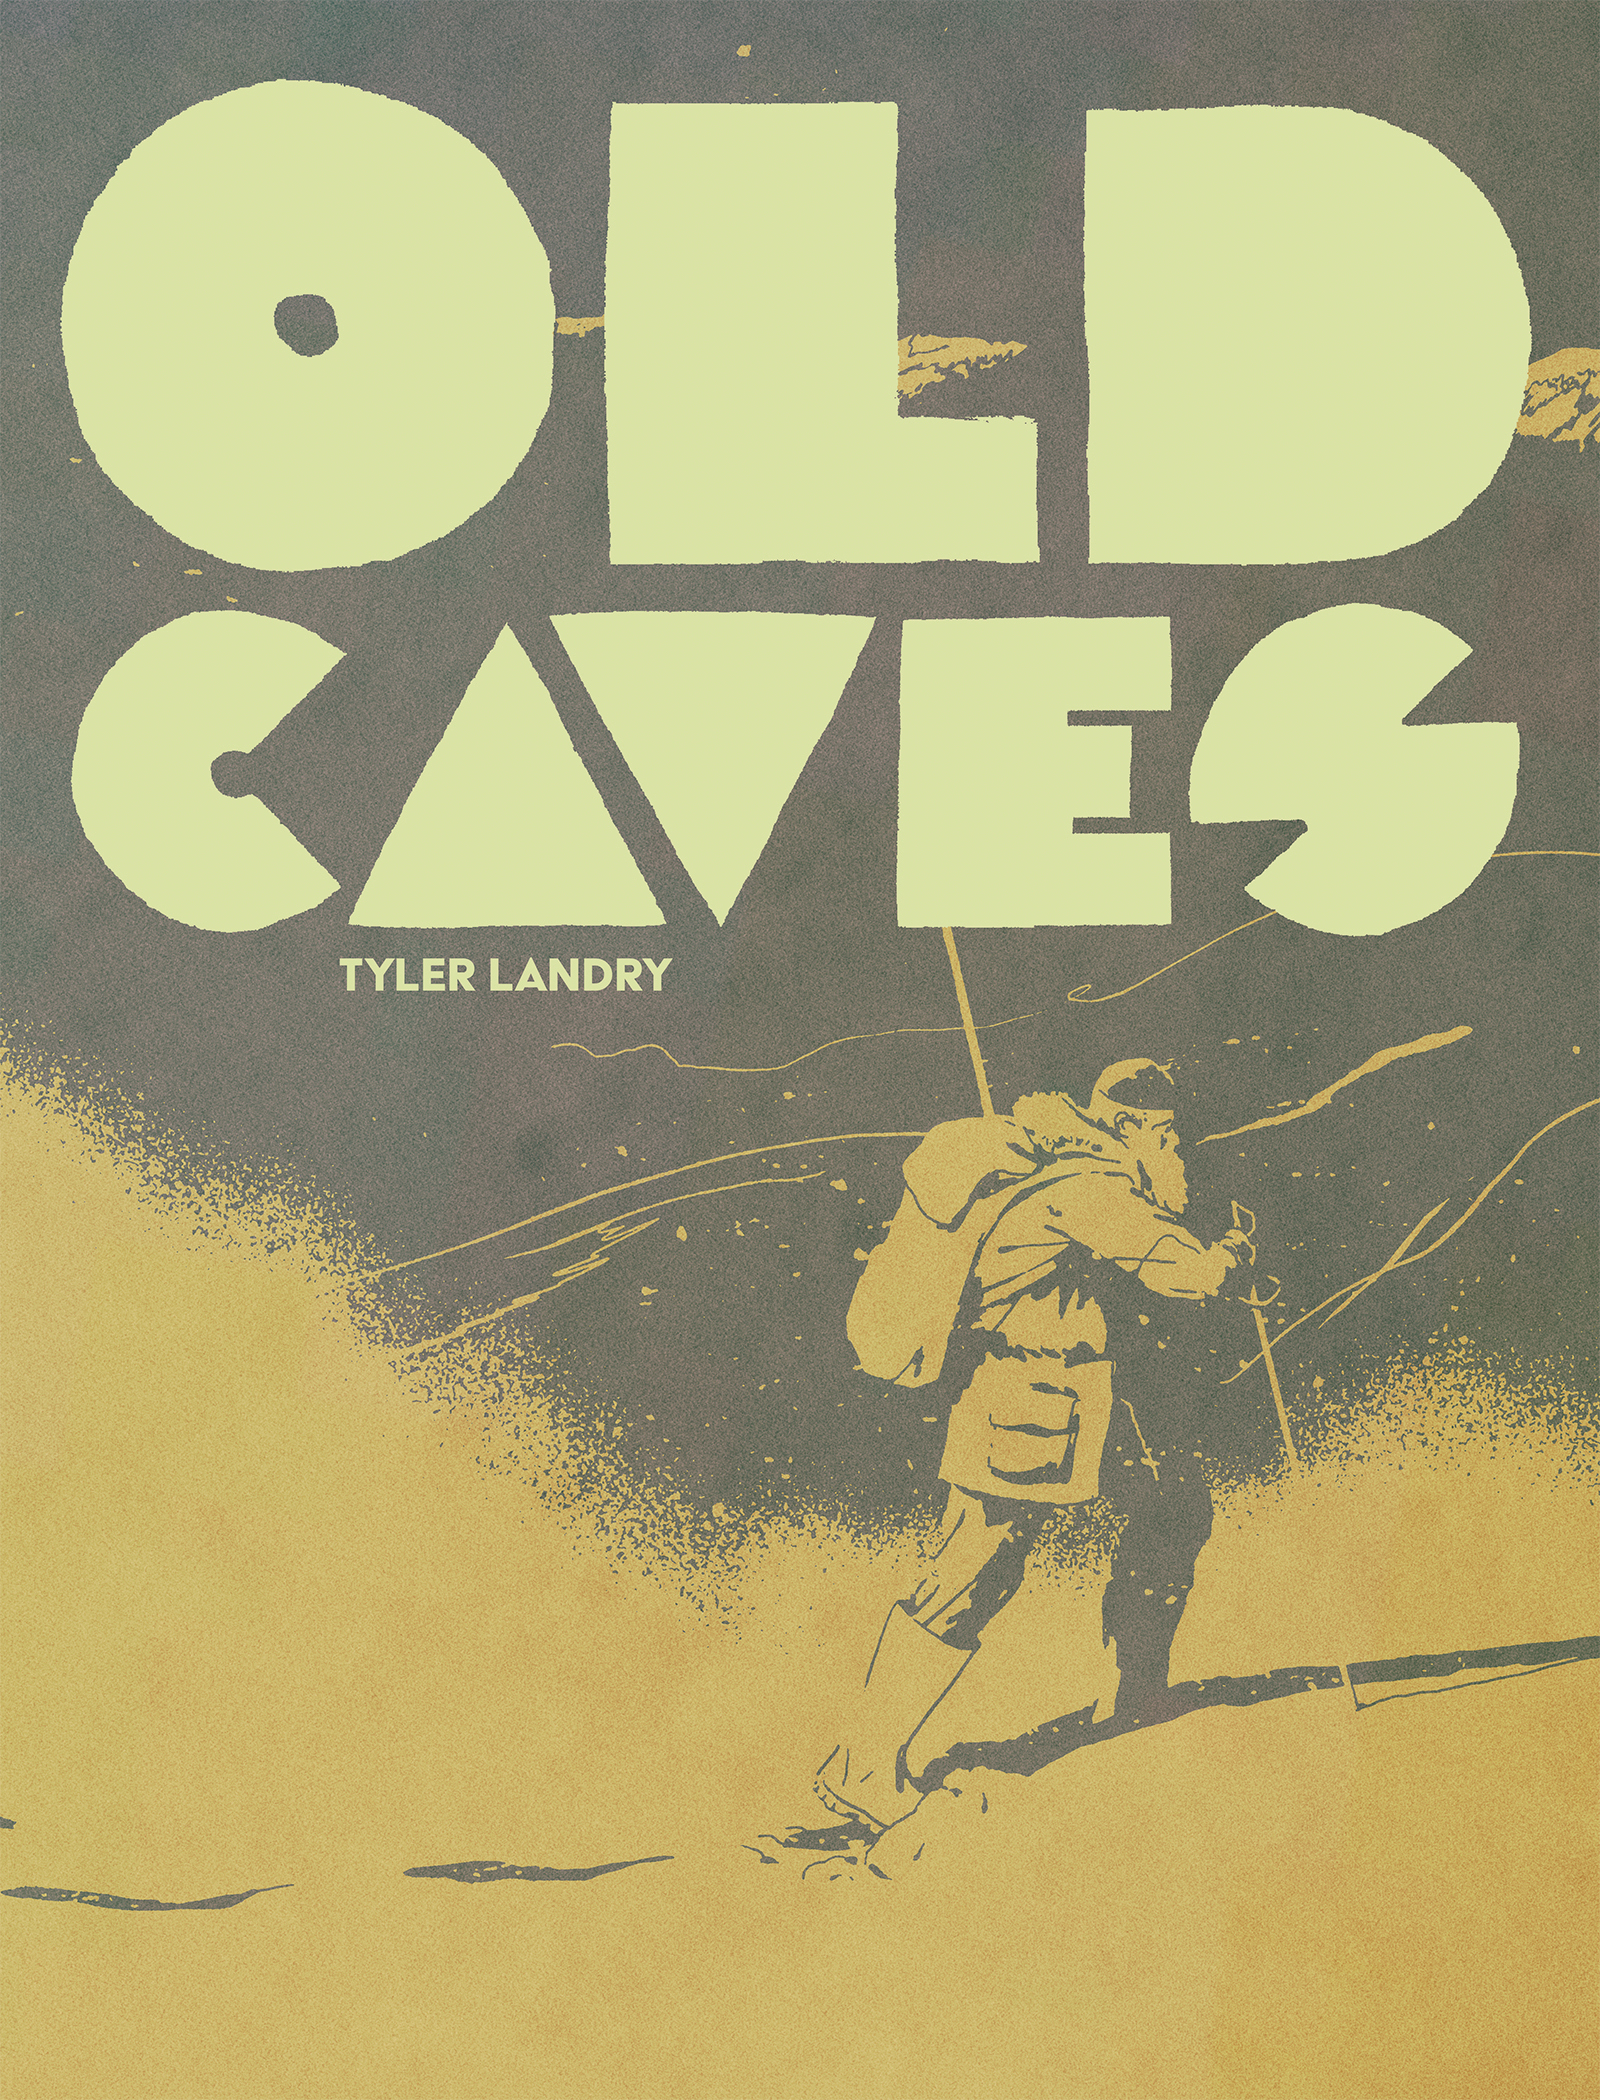 Old Caves Graphic Novel